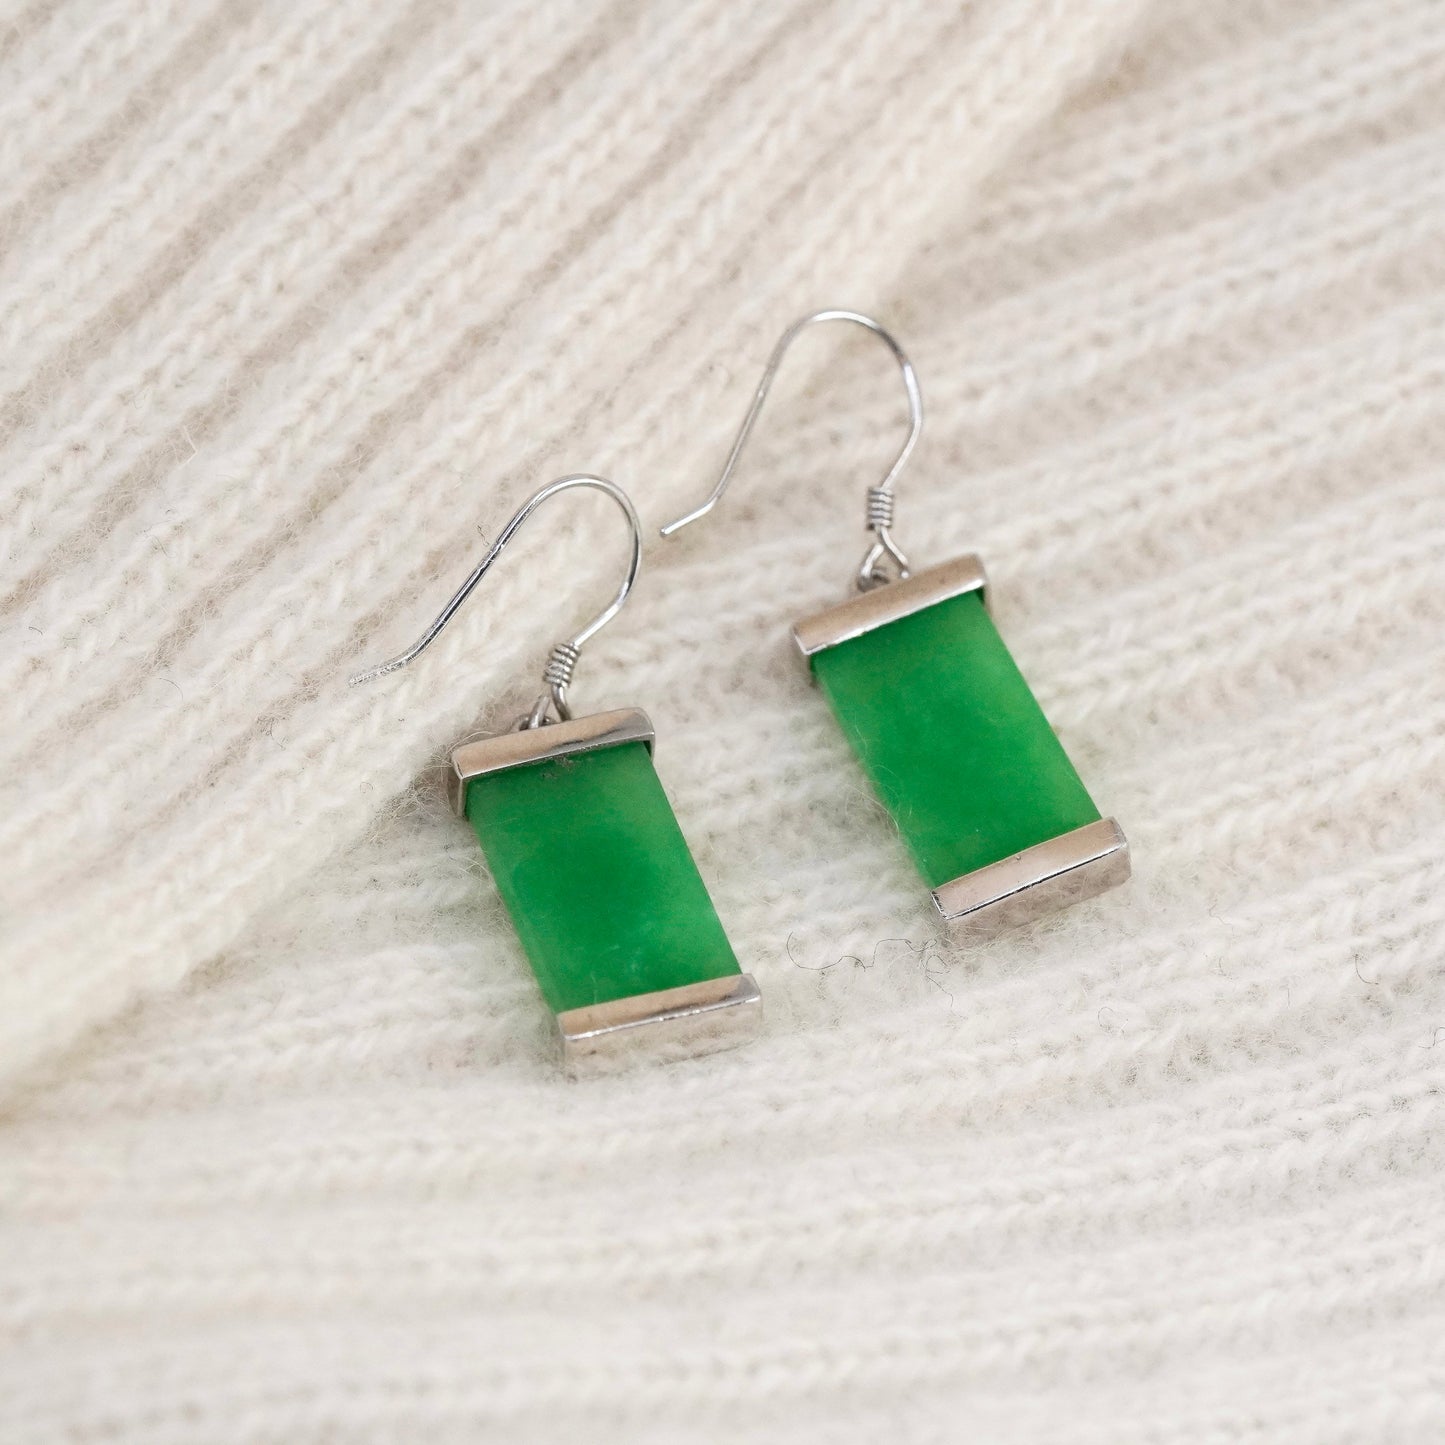 Sterling 925 silver handmade earrings with jade and Chinese character “blessed